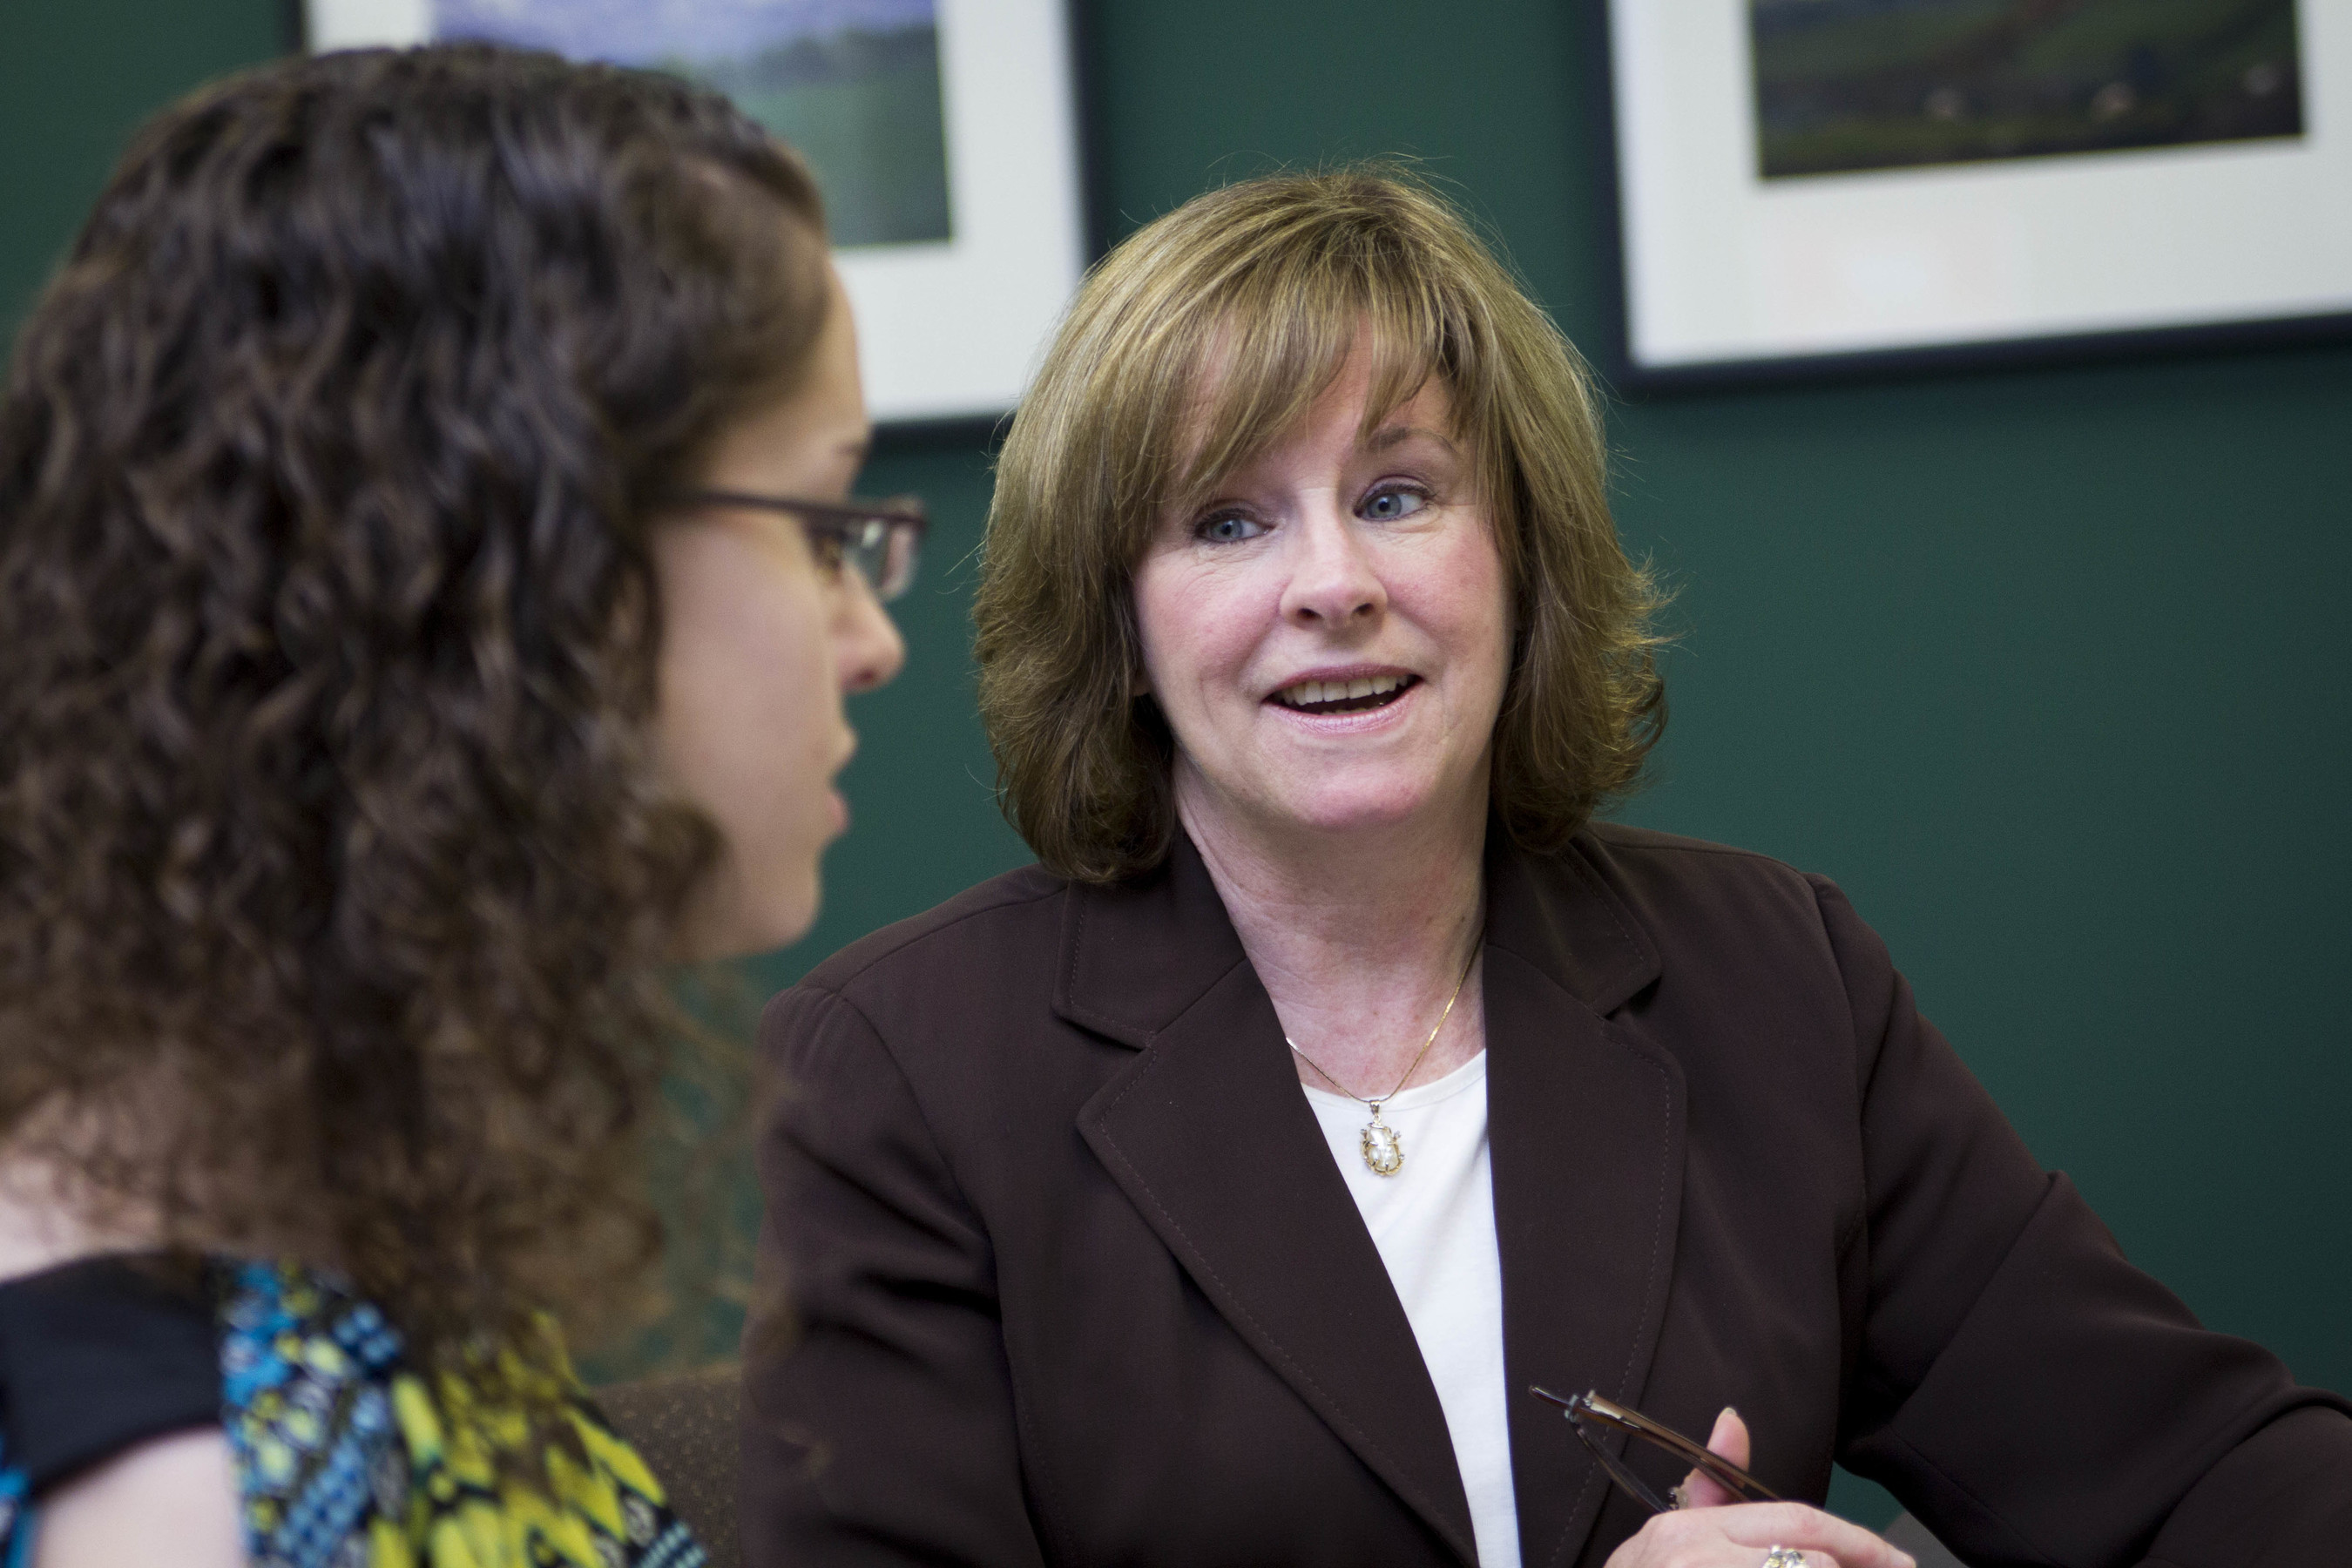 Anne Scholl-Fiedler, Vice President for Career Services at Stevenson University in Maryland, discusses job search strategies with college senior Morgan Buckingham. (PRNewsFoto/Stevenson University)